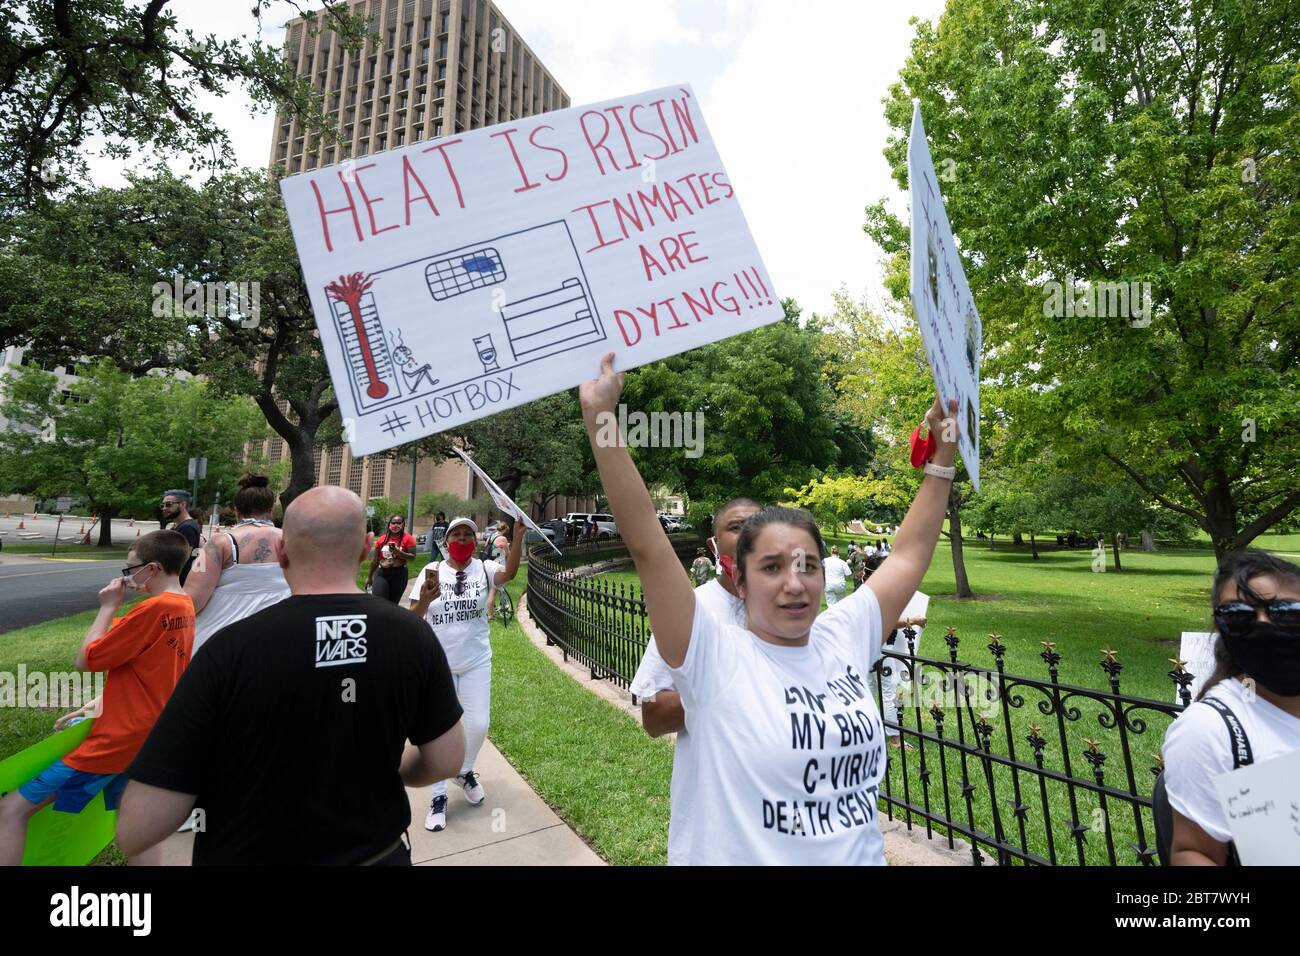 Austin, TX USA May 23, 2020: A coalition of Texas inmates rights groups rallies Saturday, May 23, 2020 at the Texas Governor's Mansion protesting the rapid spread of COVID-19 in prisons and the lack of protections for inmate during the pandemic. Hundreds of Texas inmates have tested positive and social distancing is impossible, critics say. Credit: Bob Daemmrich/Alamy Live News Stock Photo